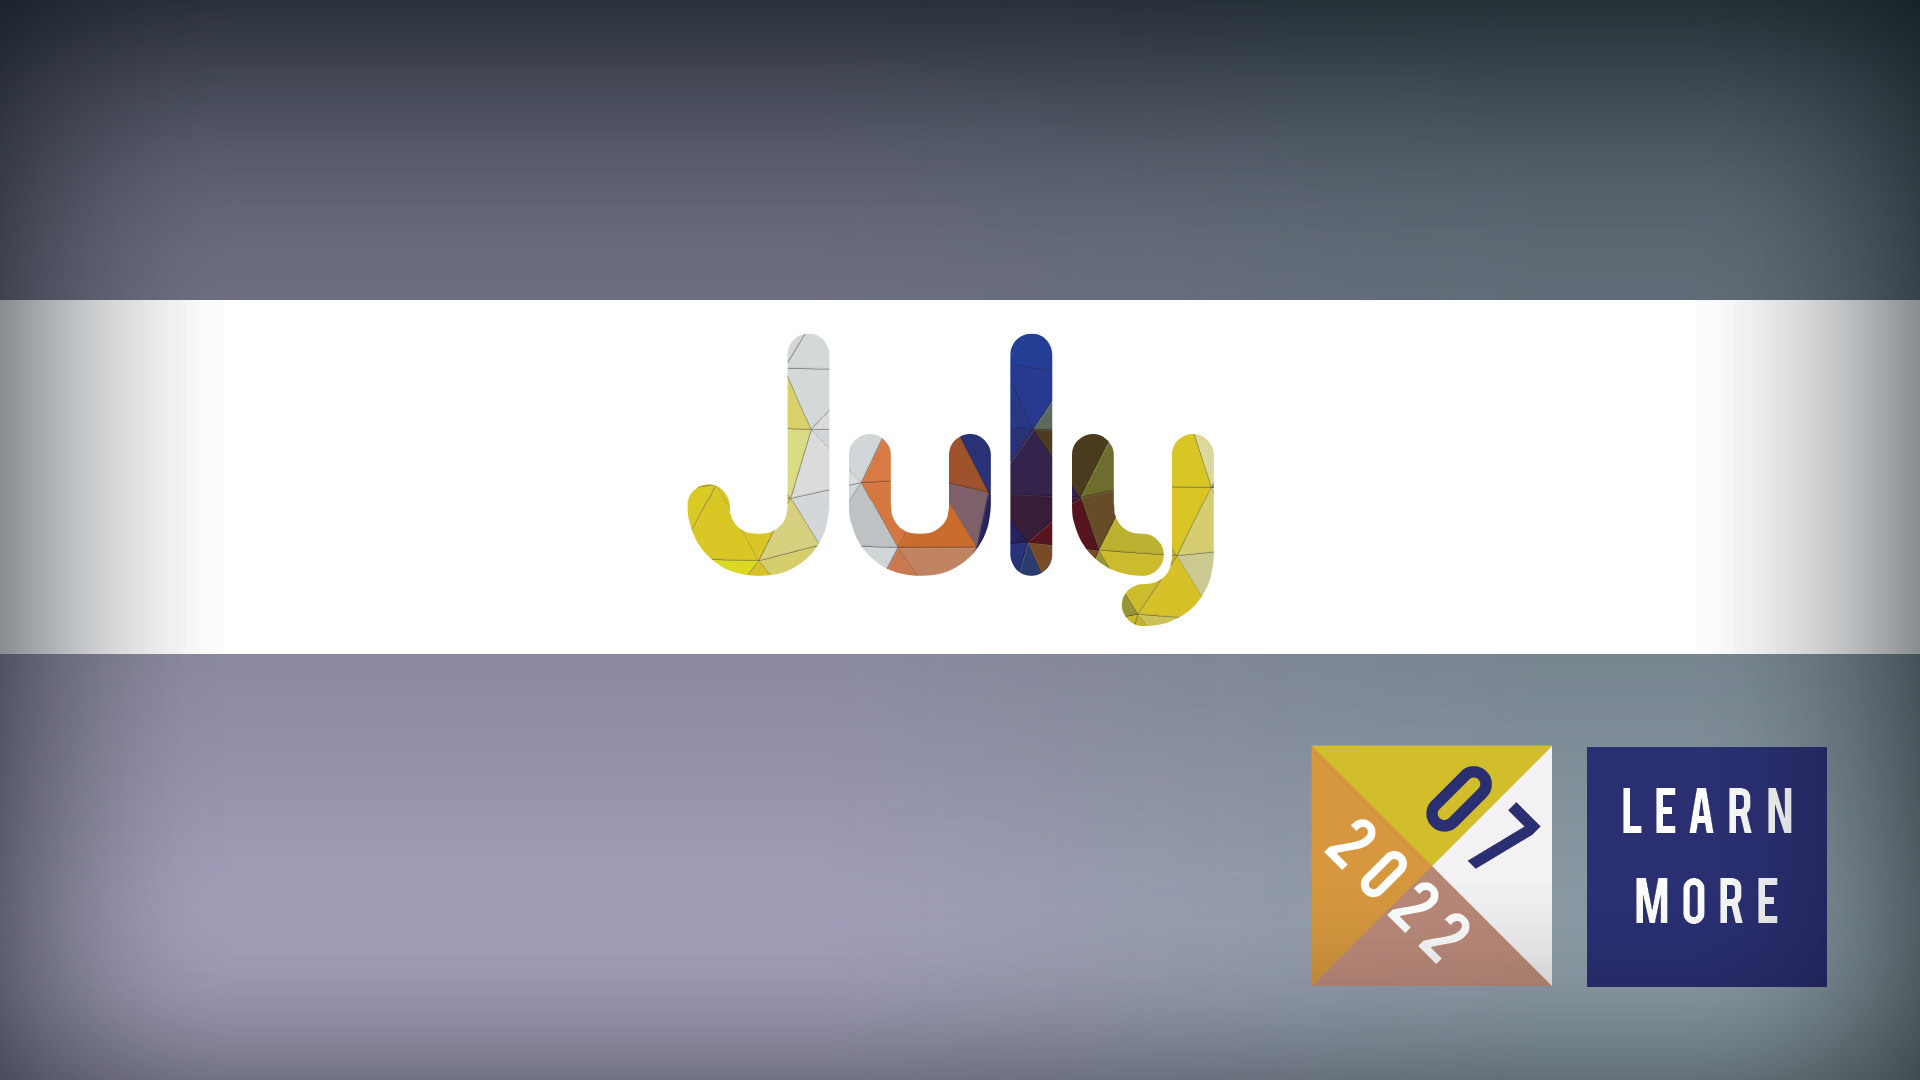 What’s Happening in July
 
